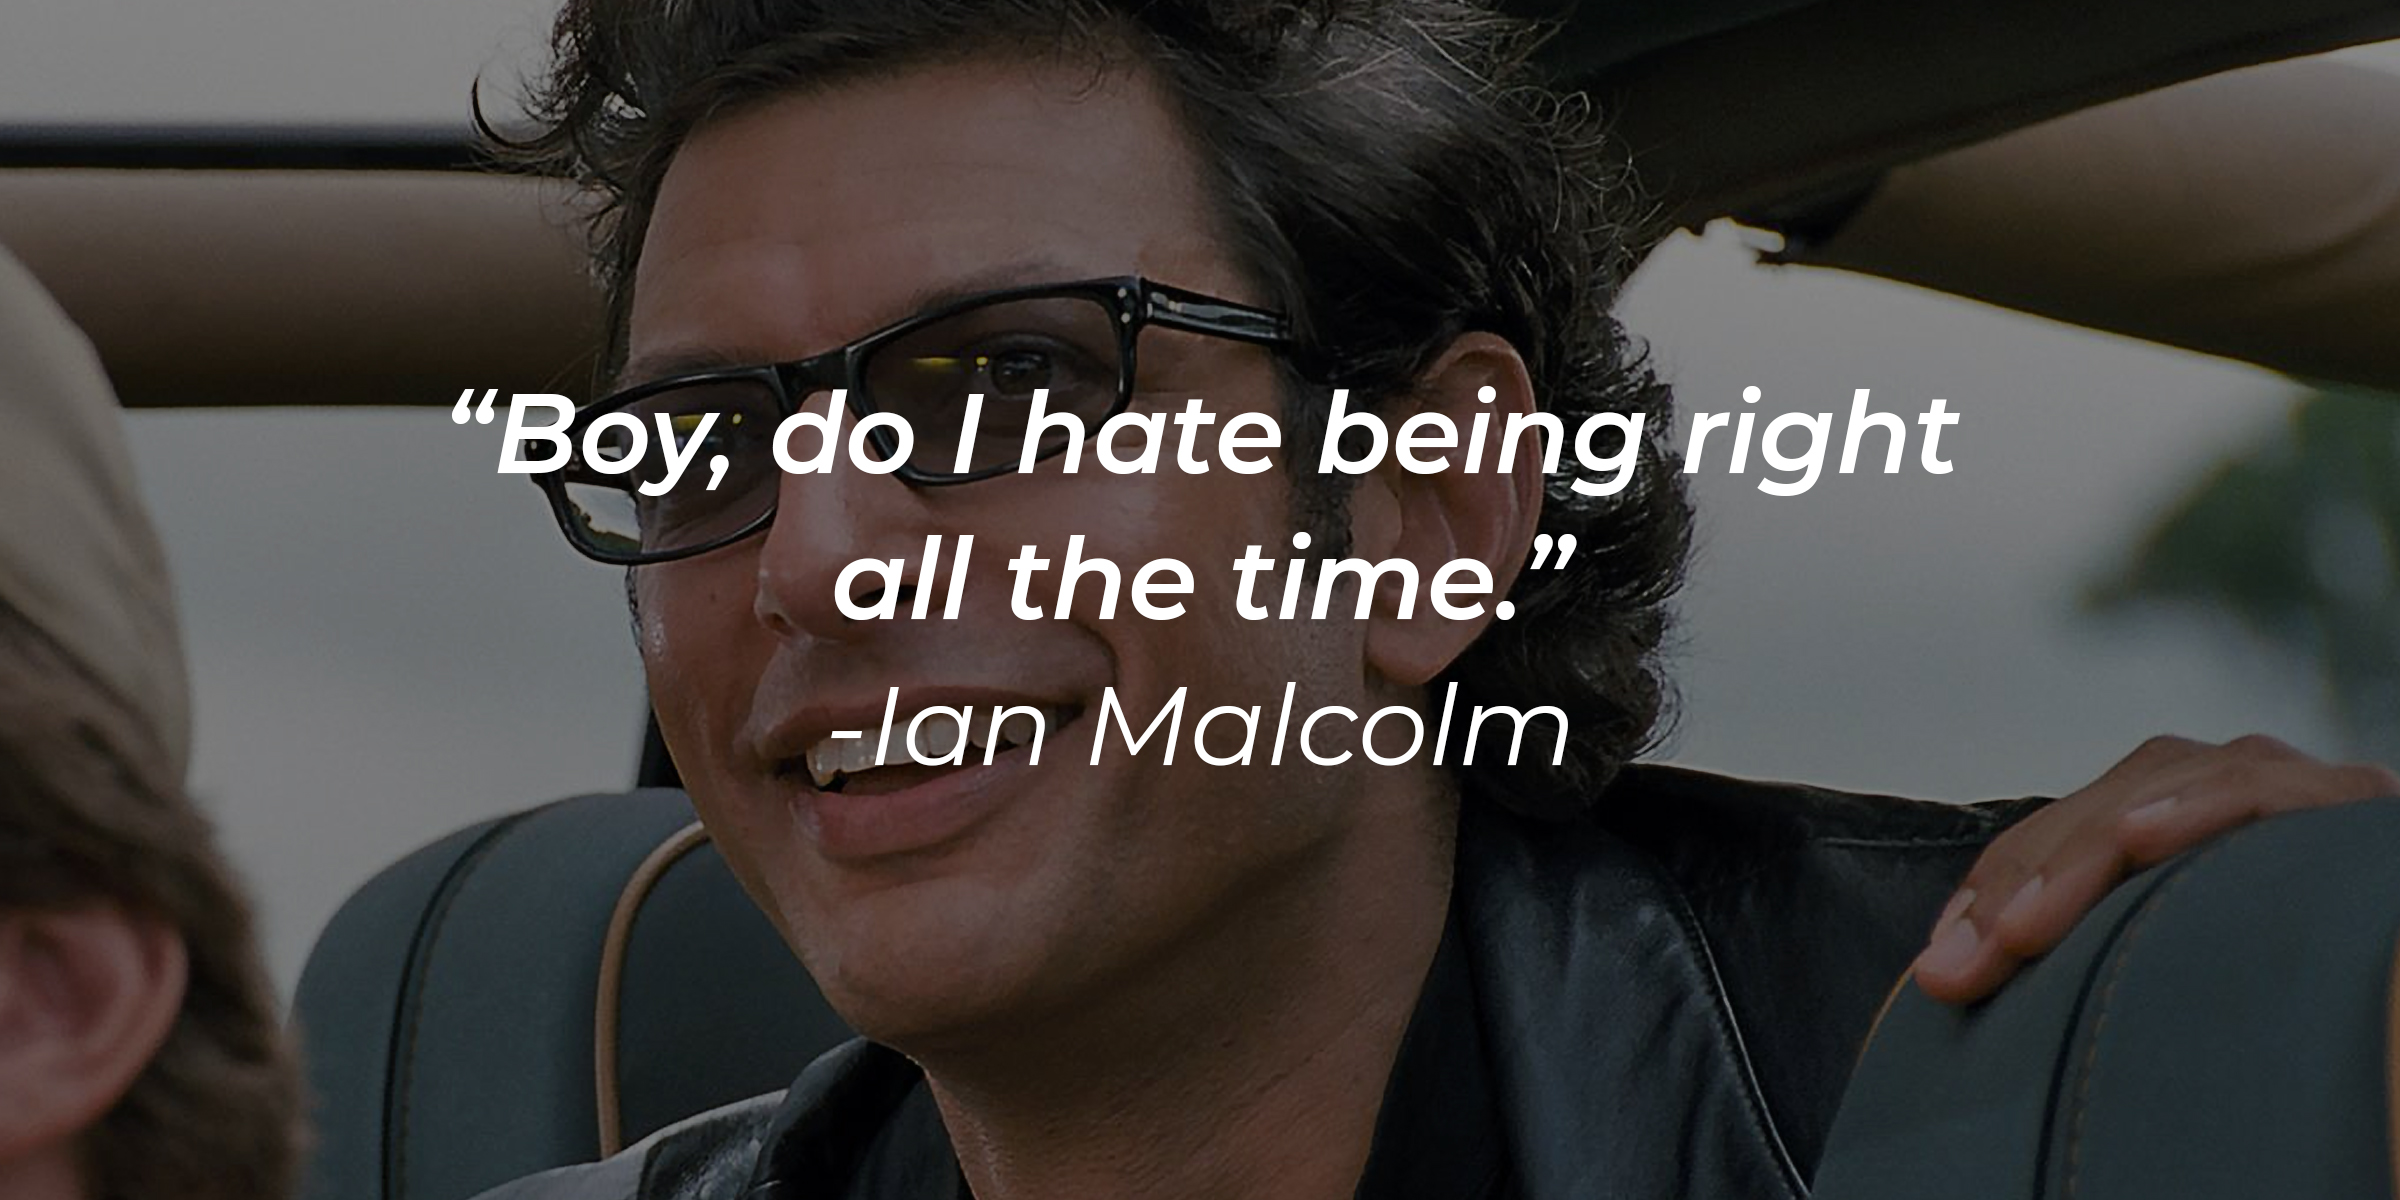 An image of Ian Malcolm with his quote: “Boy, do I hate being right all the time.” | Source: Facebook.com/JurassicWorld